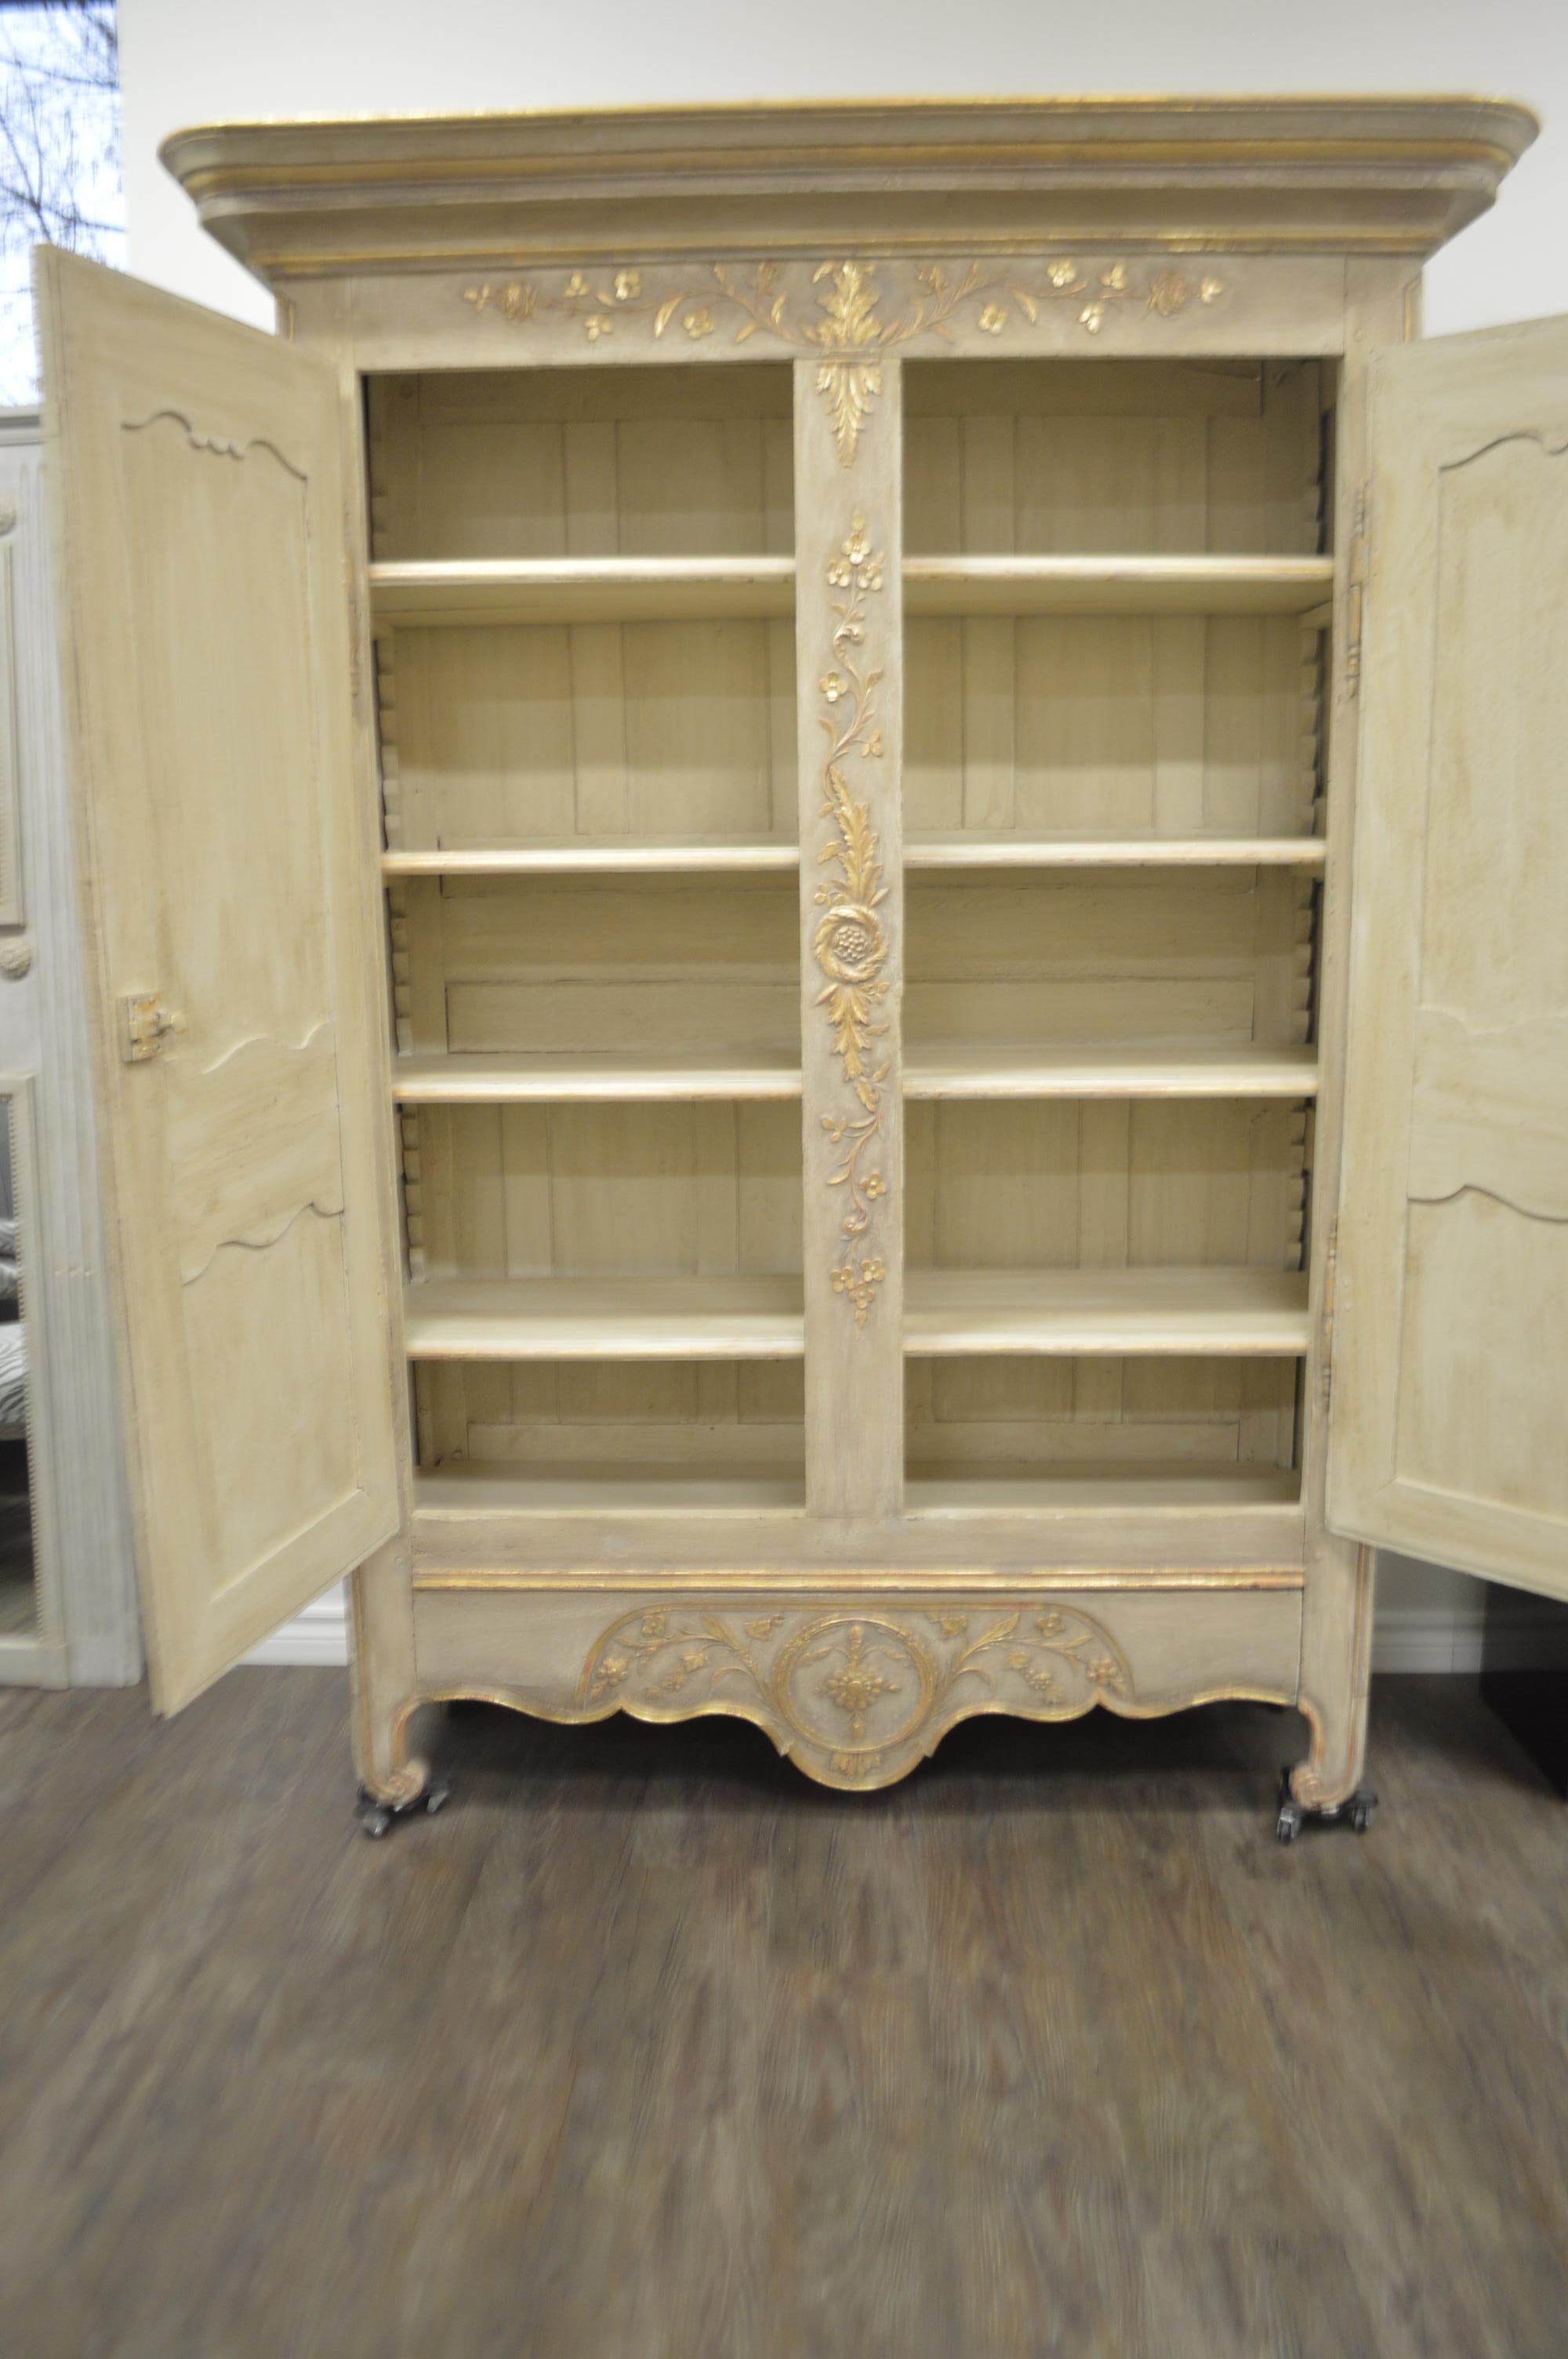 Louis XV Style Highly Decorative Painted Armoire with Gilt Details, 5 Shelves (19. Jahrhundert)